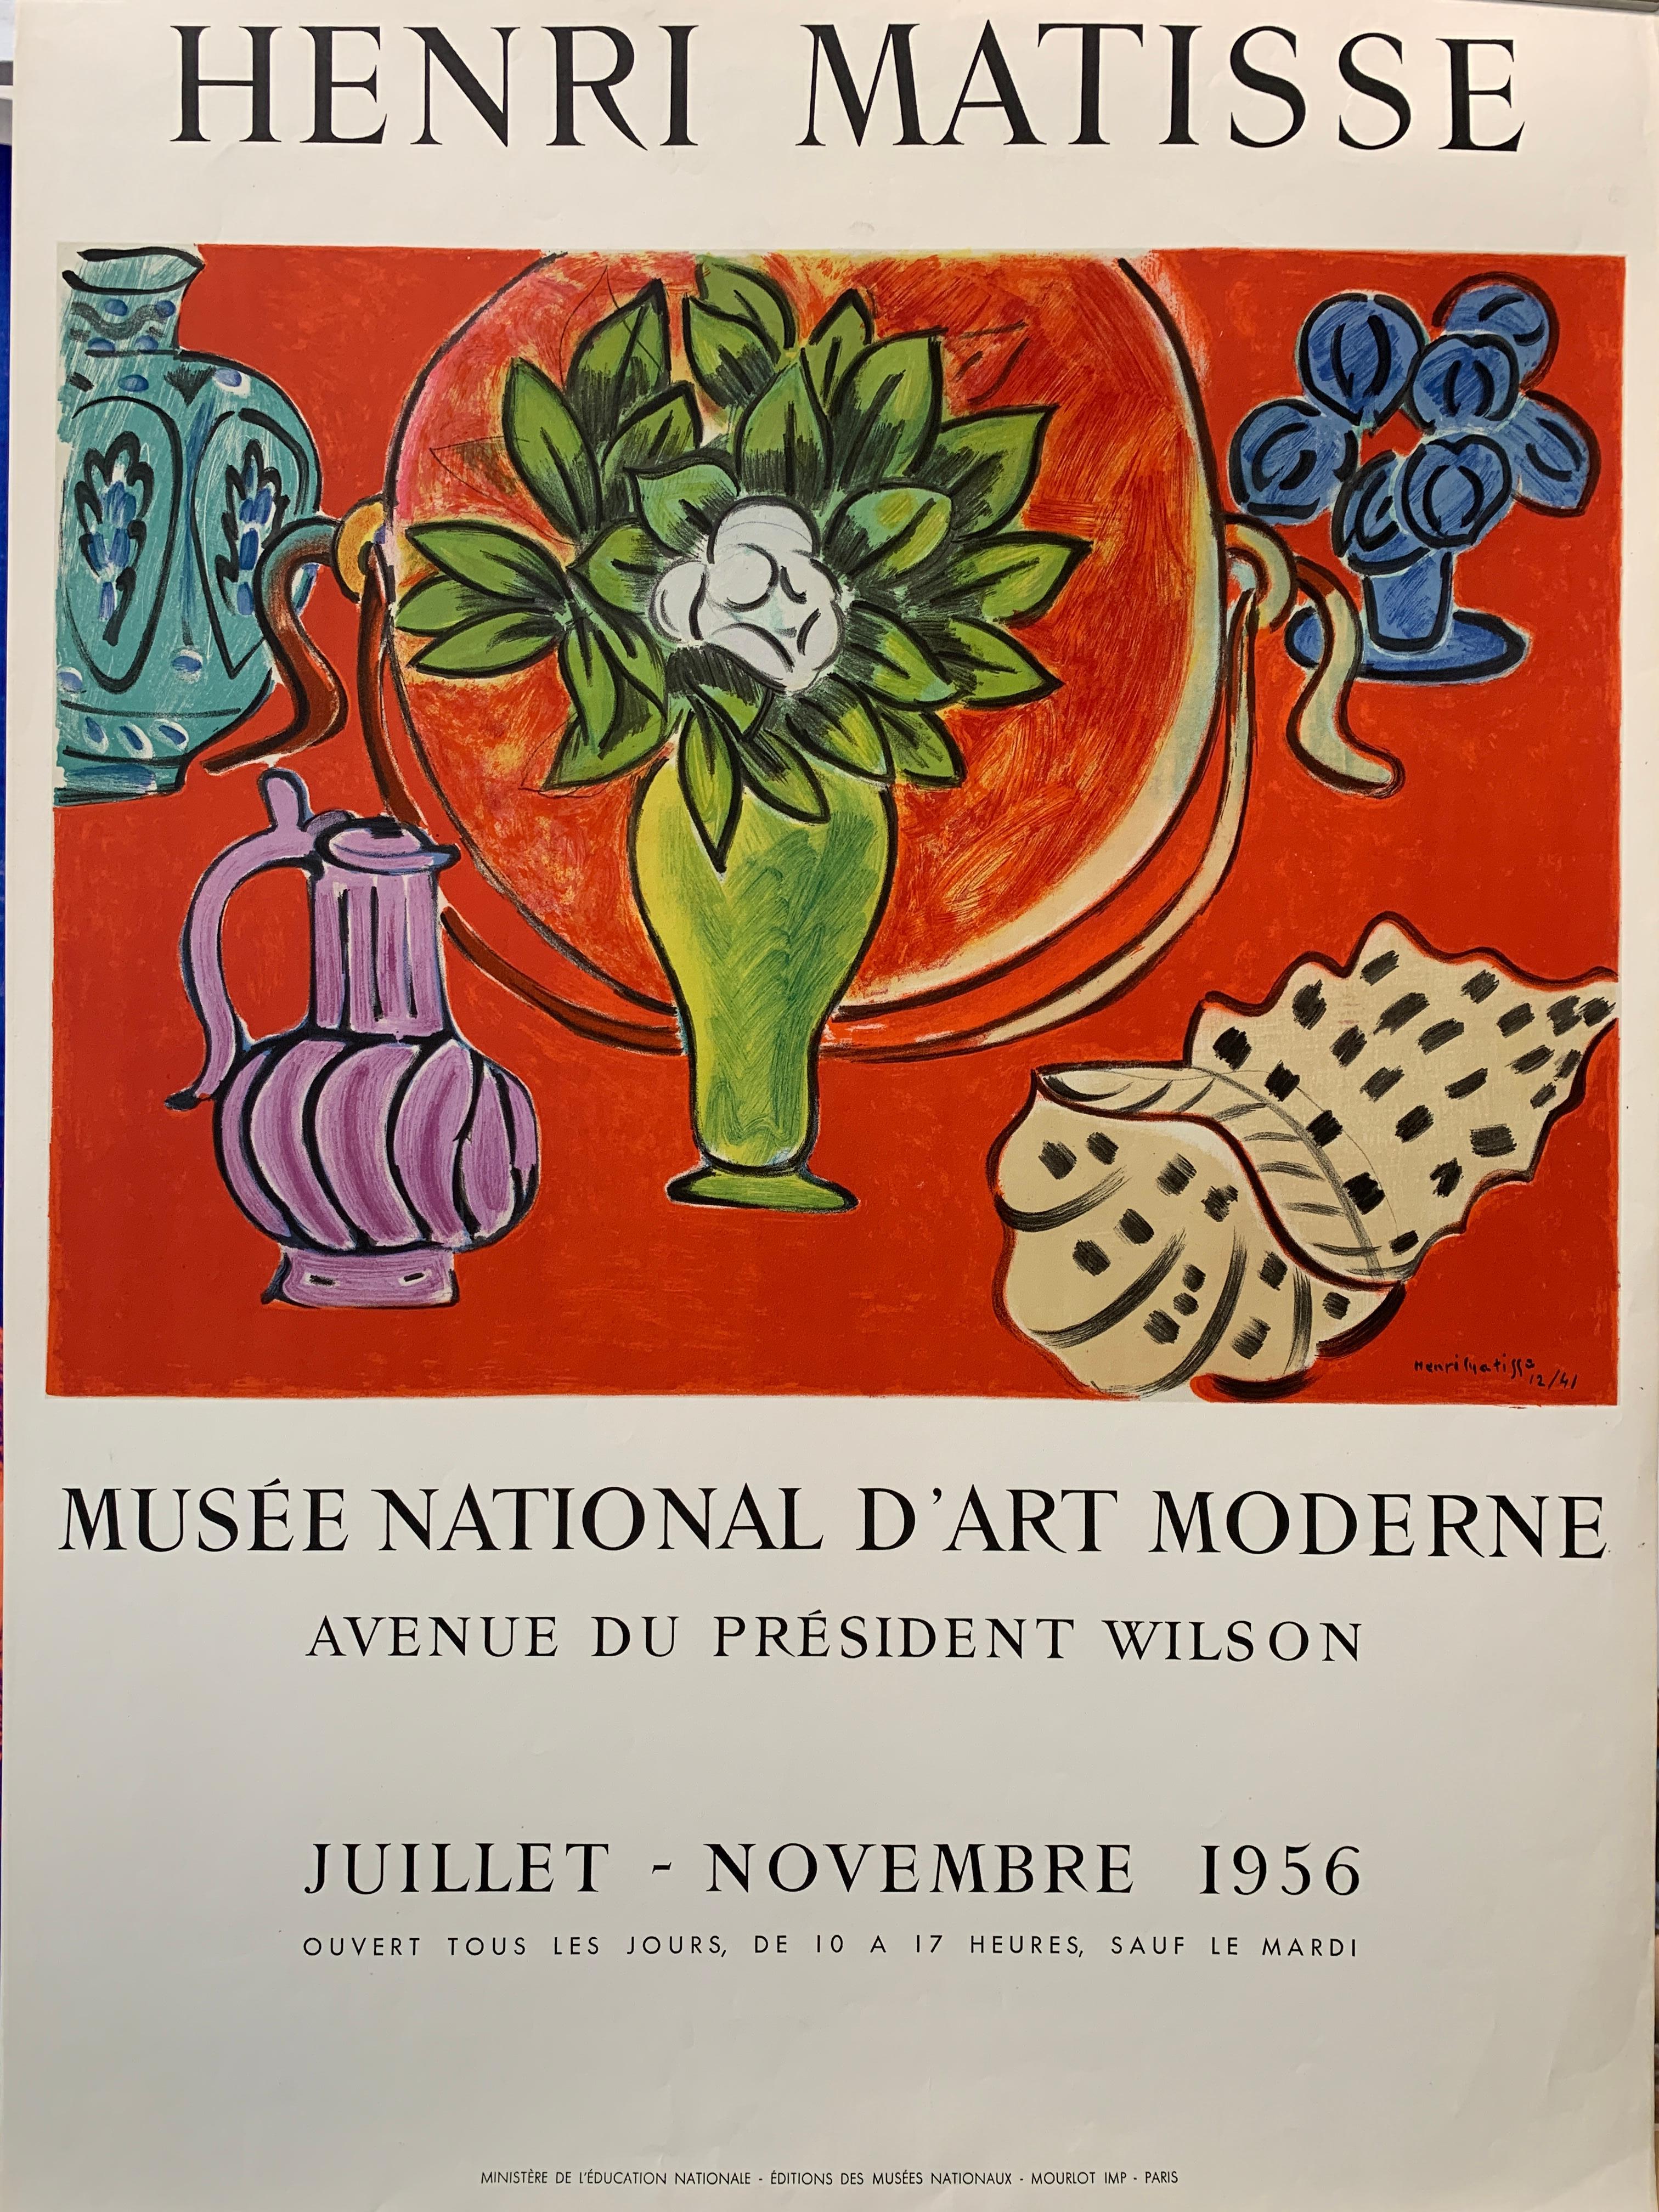 Between 1900 and 1905, Matisse painted in the style called Fauves (French for “wild beasts”). Many of his finest works were created in the decade or so after 1906. Matisse developed a style that emphasised flattened forms and decorative pattern.